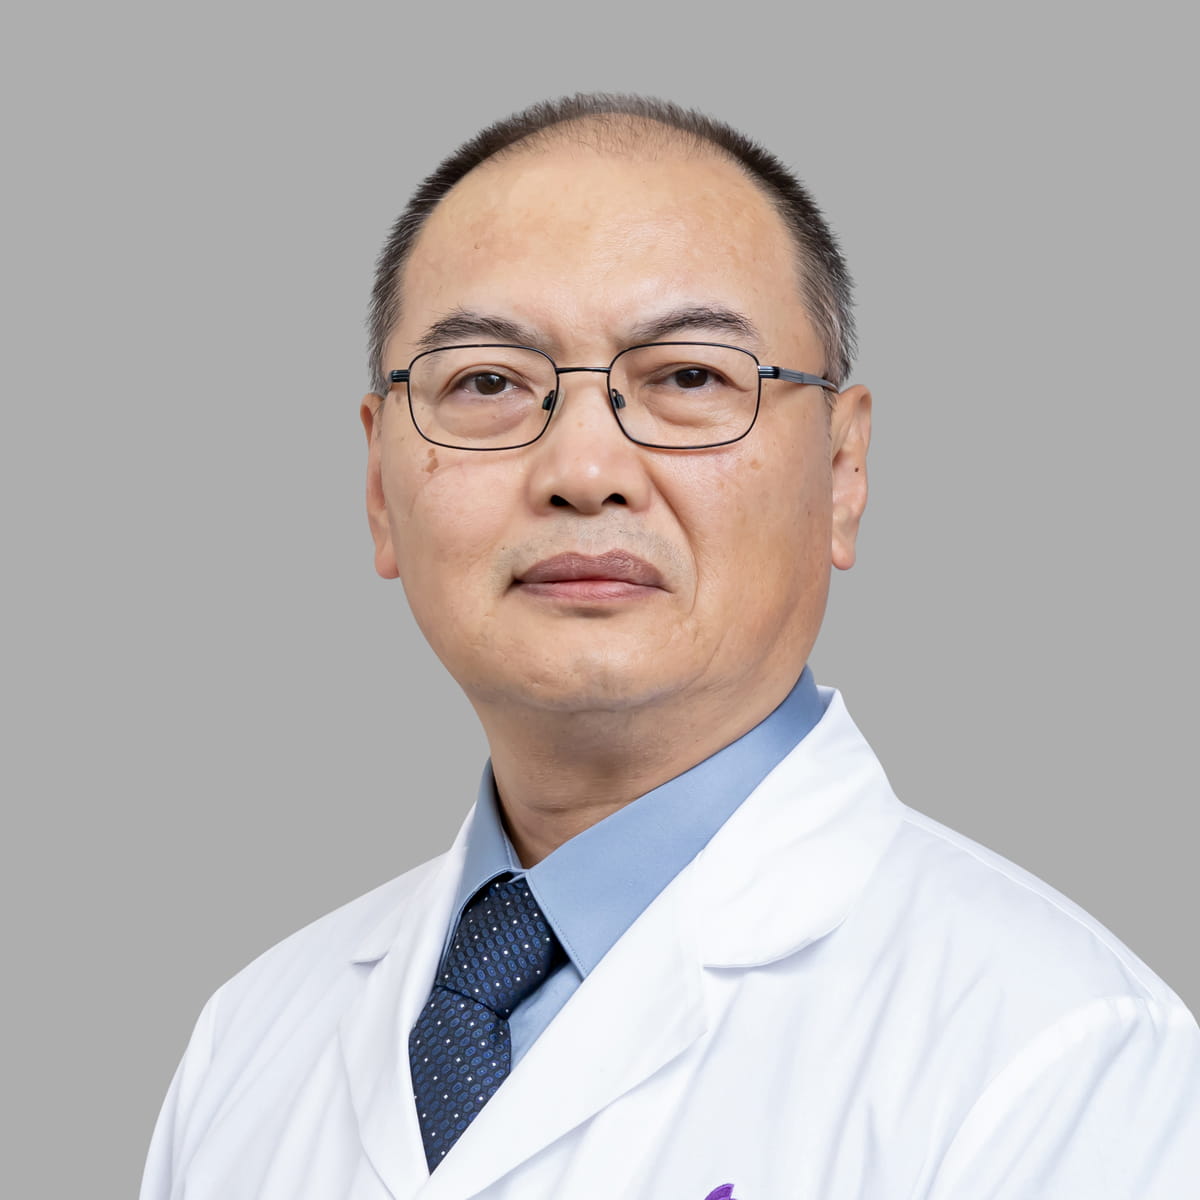 A friendly image of Weihua Tang MD